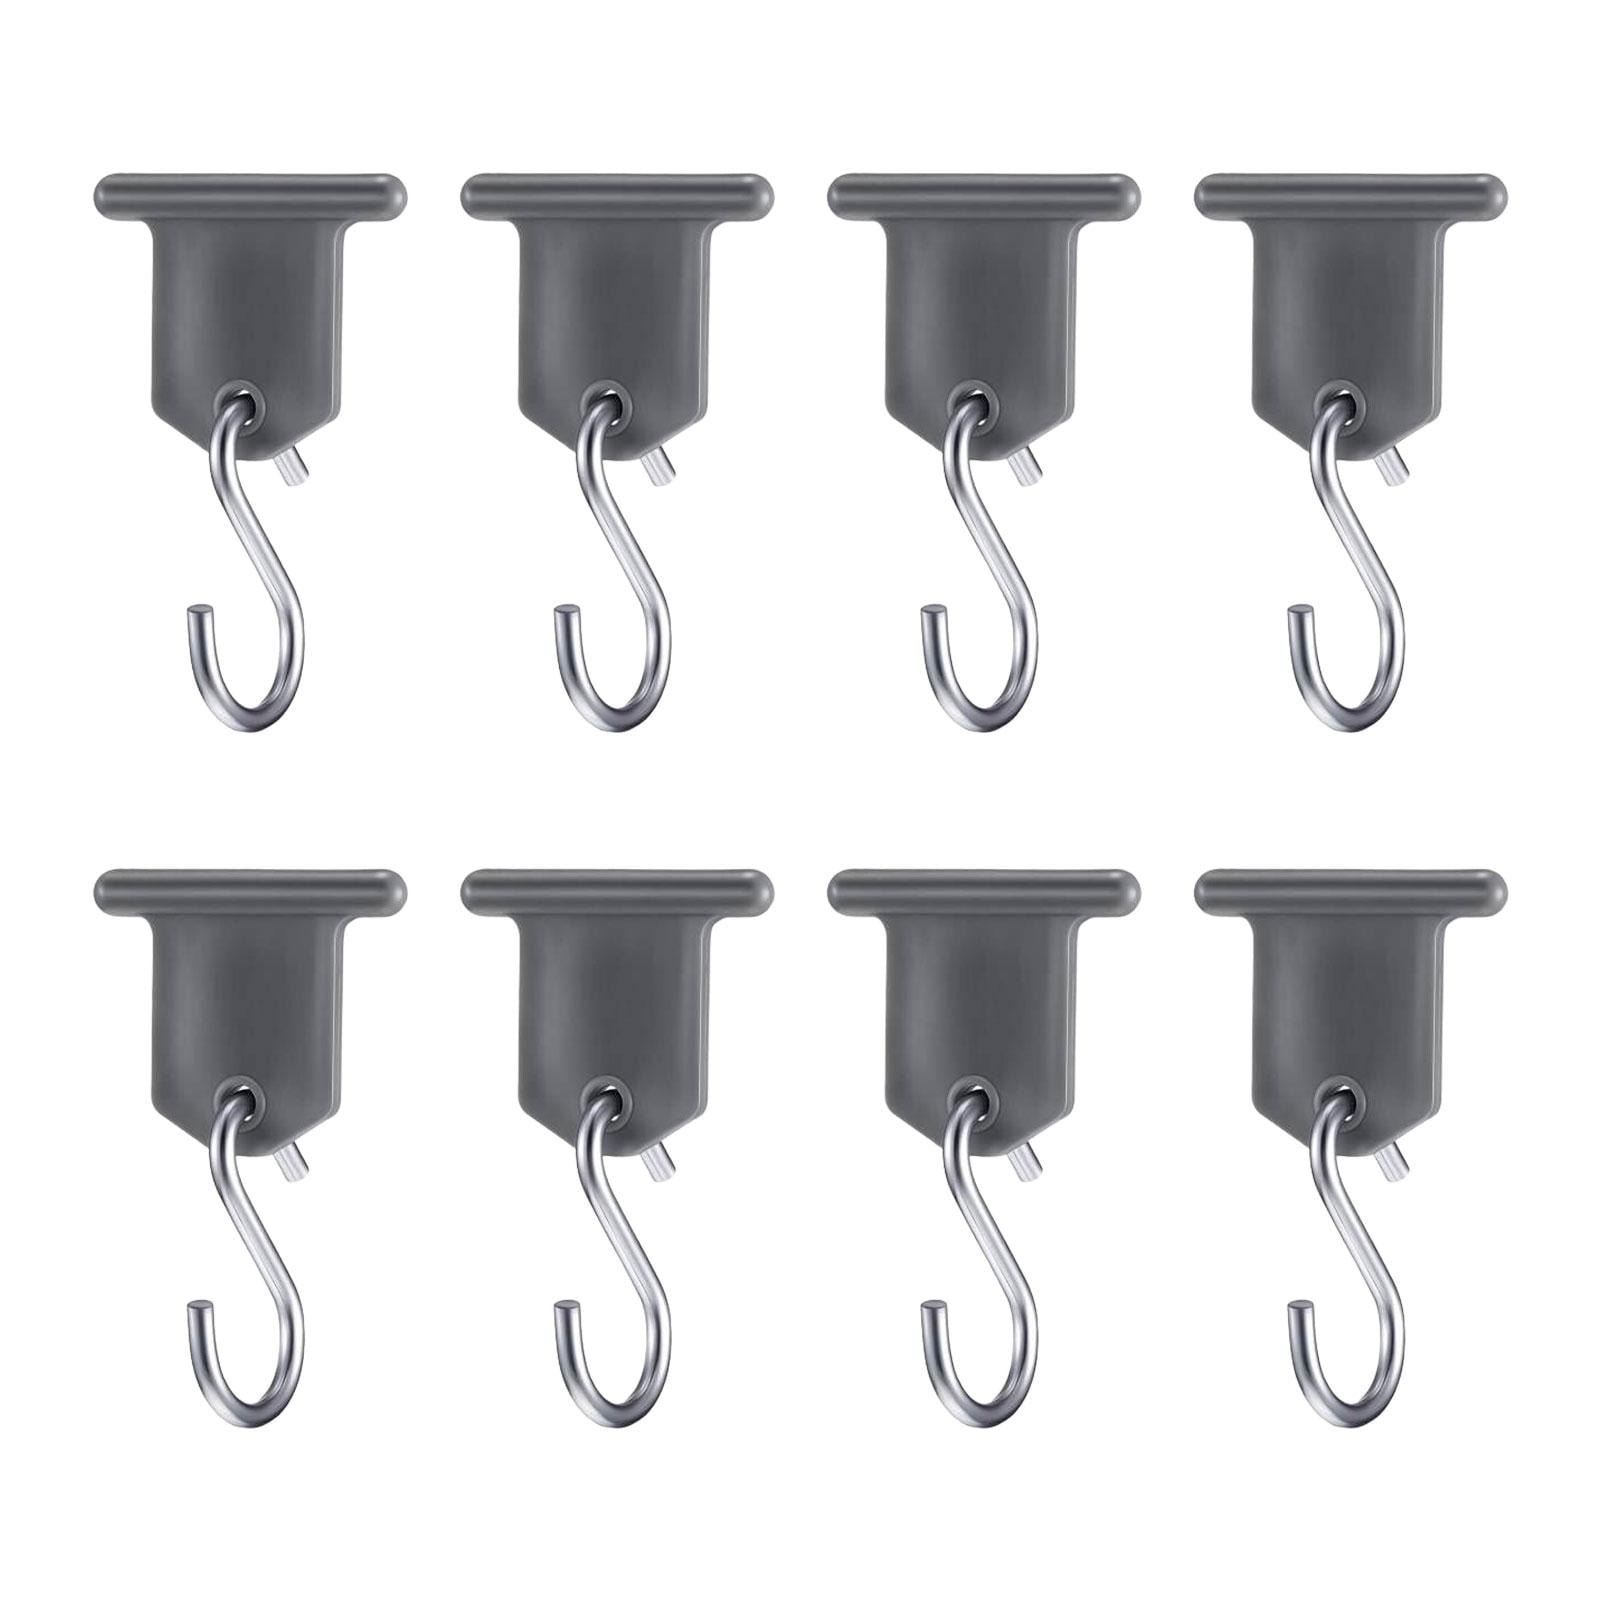 Klippy Clips Easy to use Them to Hang Trailer Awning Lights onto rv Awning String Lights,Rope Lights,Hang Lights,Party Light Holder,Caravan Curtain,Travel Trailer Light Strand Pack of 50 AUXPhome